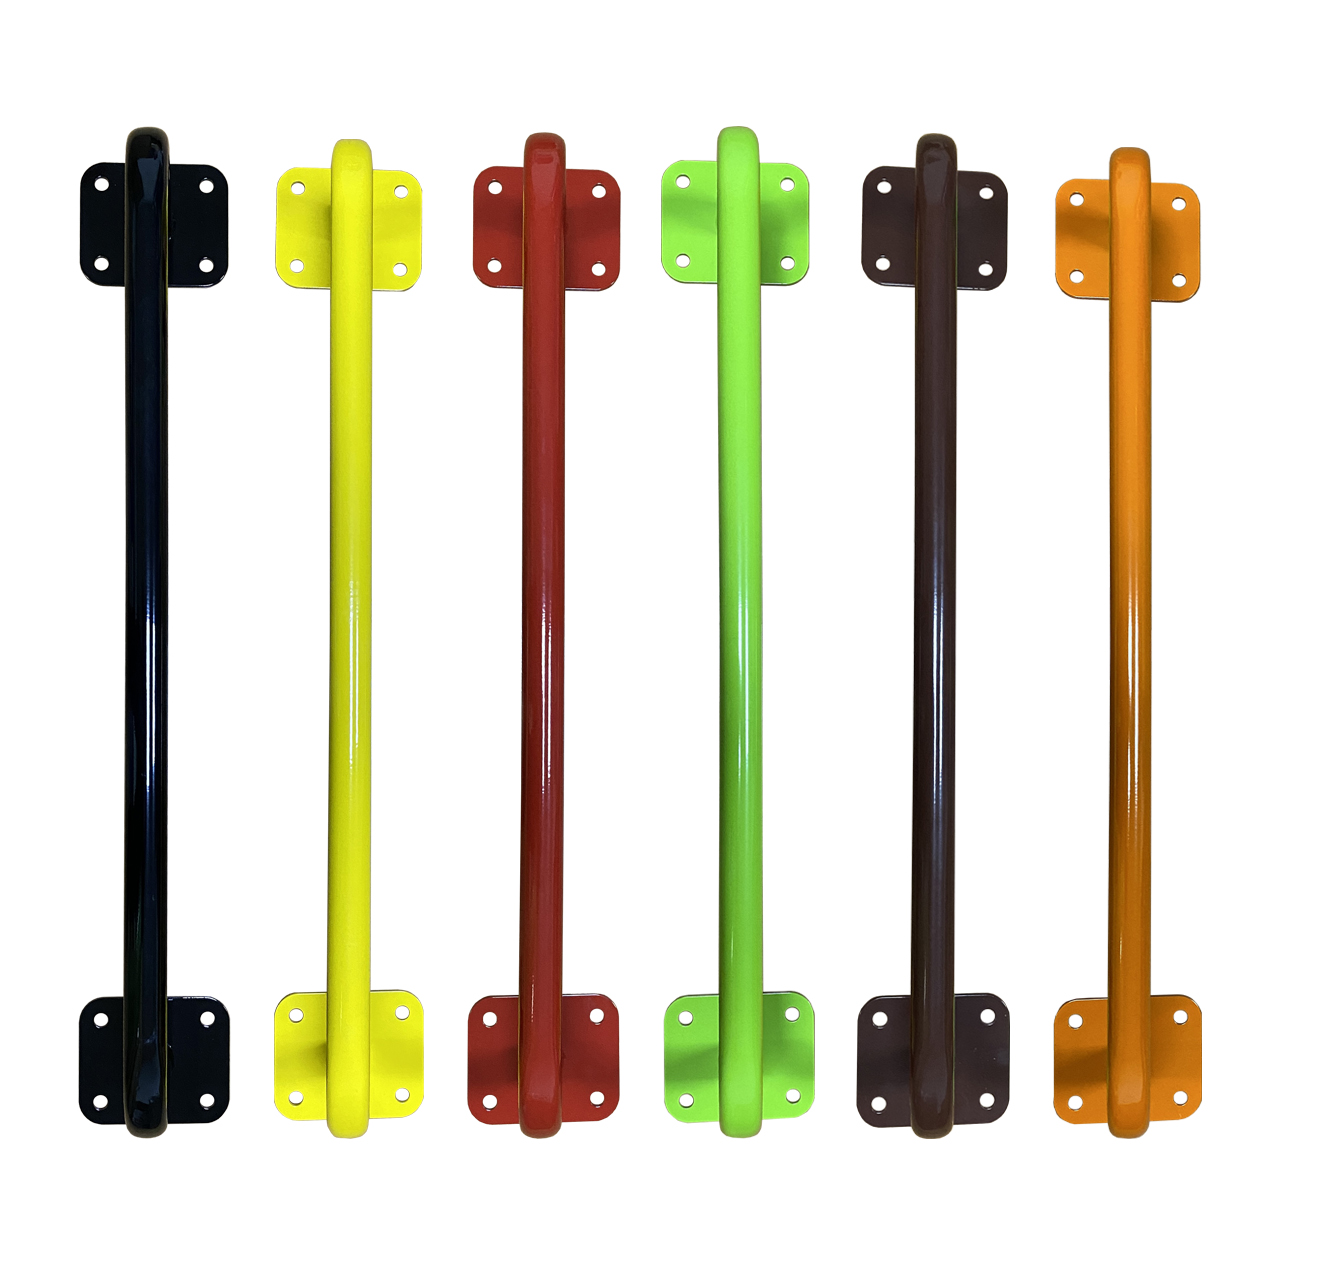 CTSC Steel Monkey Handle Bar Sports Climbers To Build Your Arm Muscle And Great For Excellent Gym Activities. (6 bars a set)